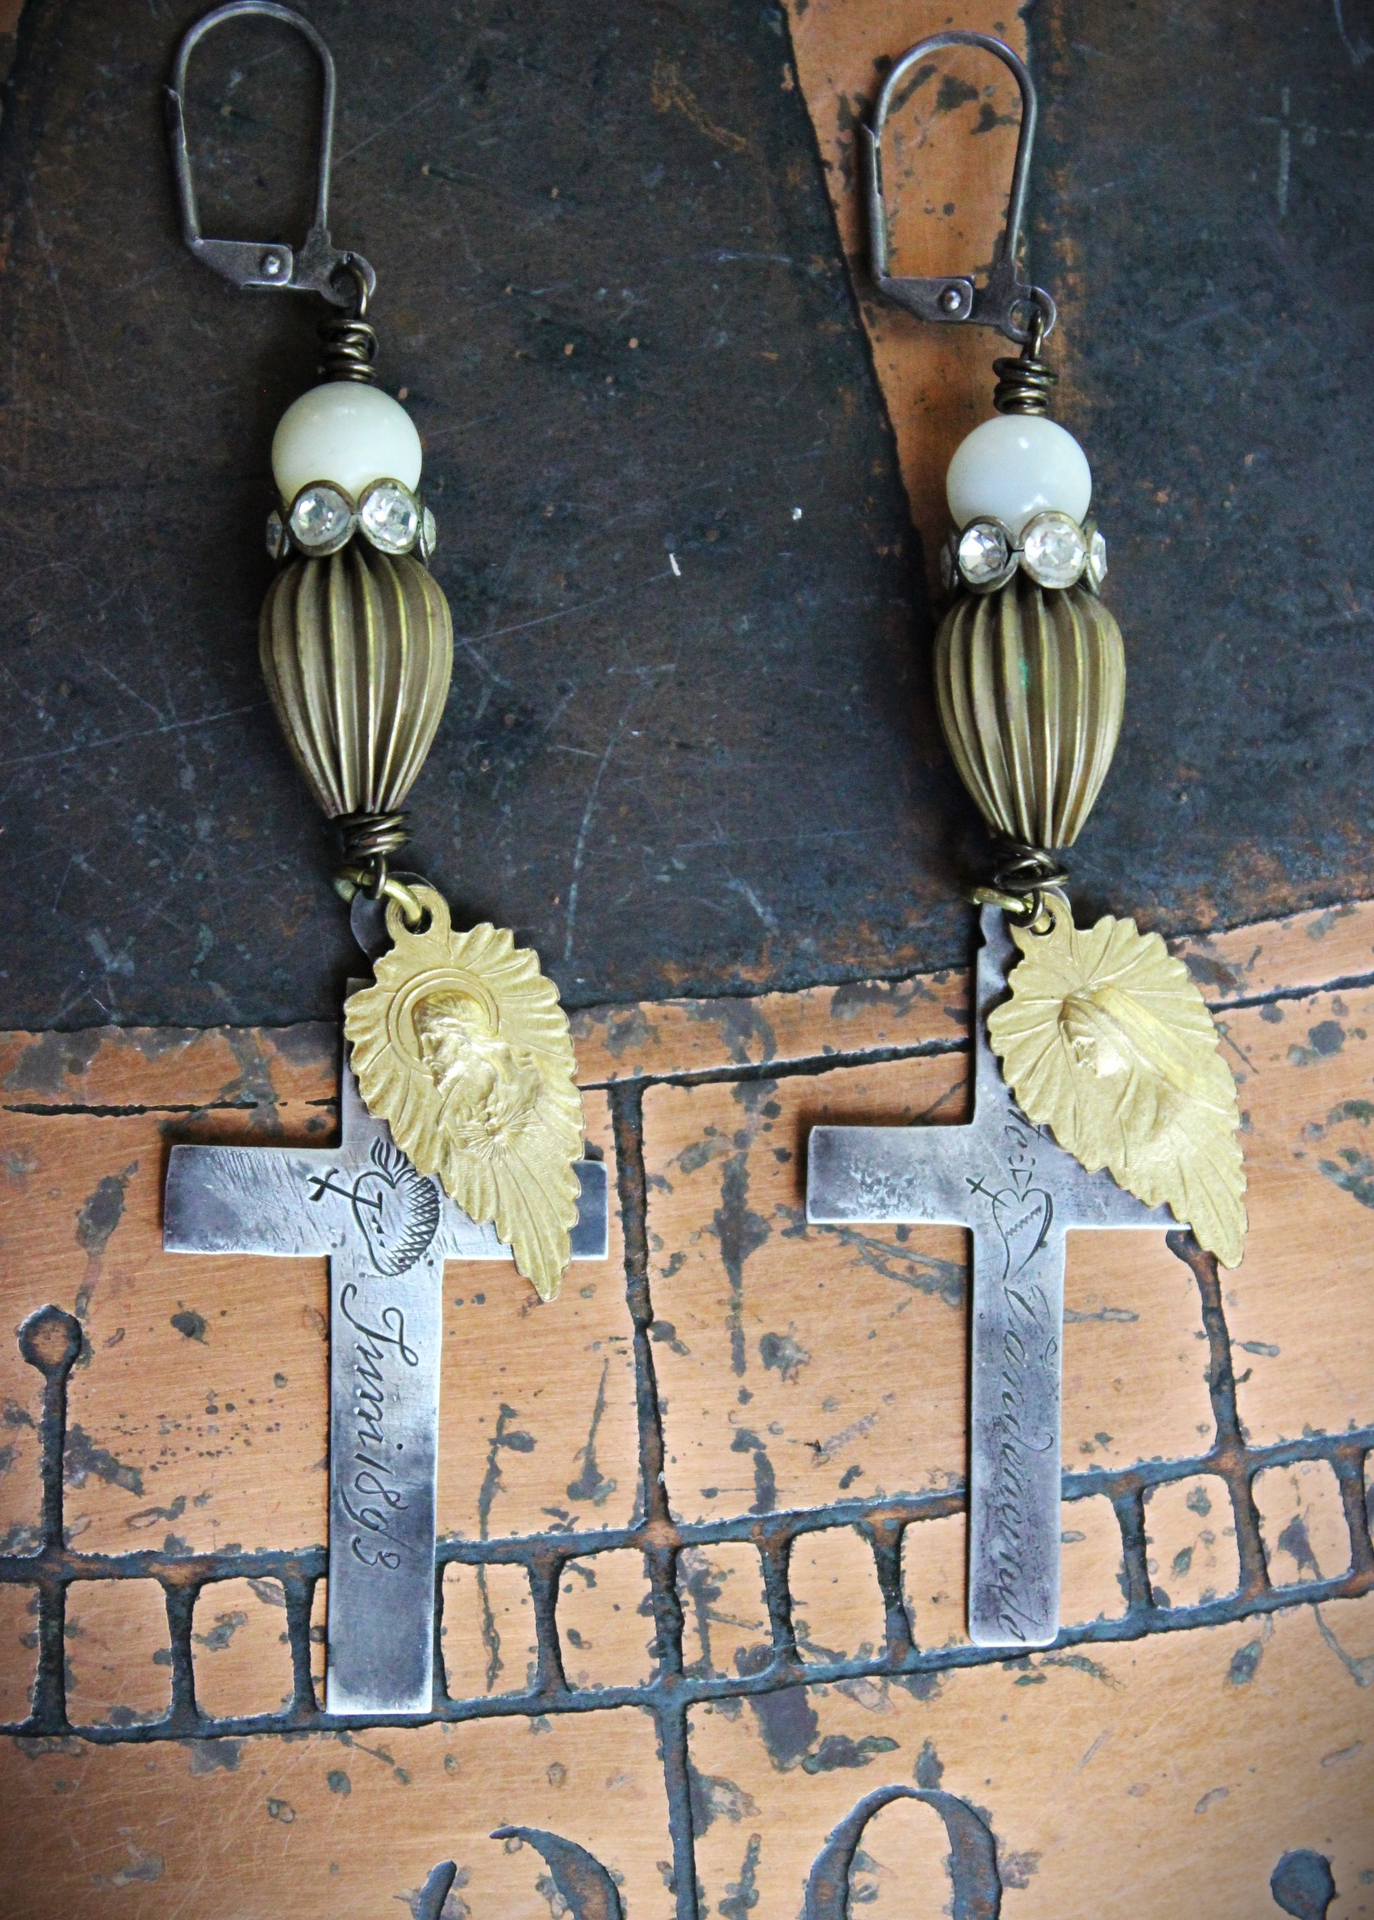 NEW! Antique French Sterling Engraved Nun's Cross Earrings w/Gold Leaf Mary and Jesus Findings, Antique Rhinestone Rondelles, Sterling Earring Wires